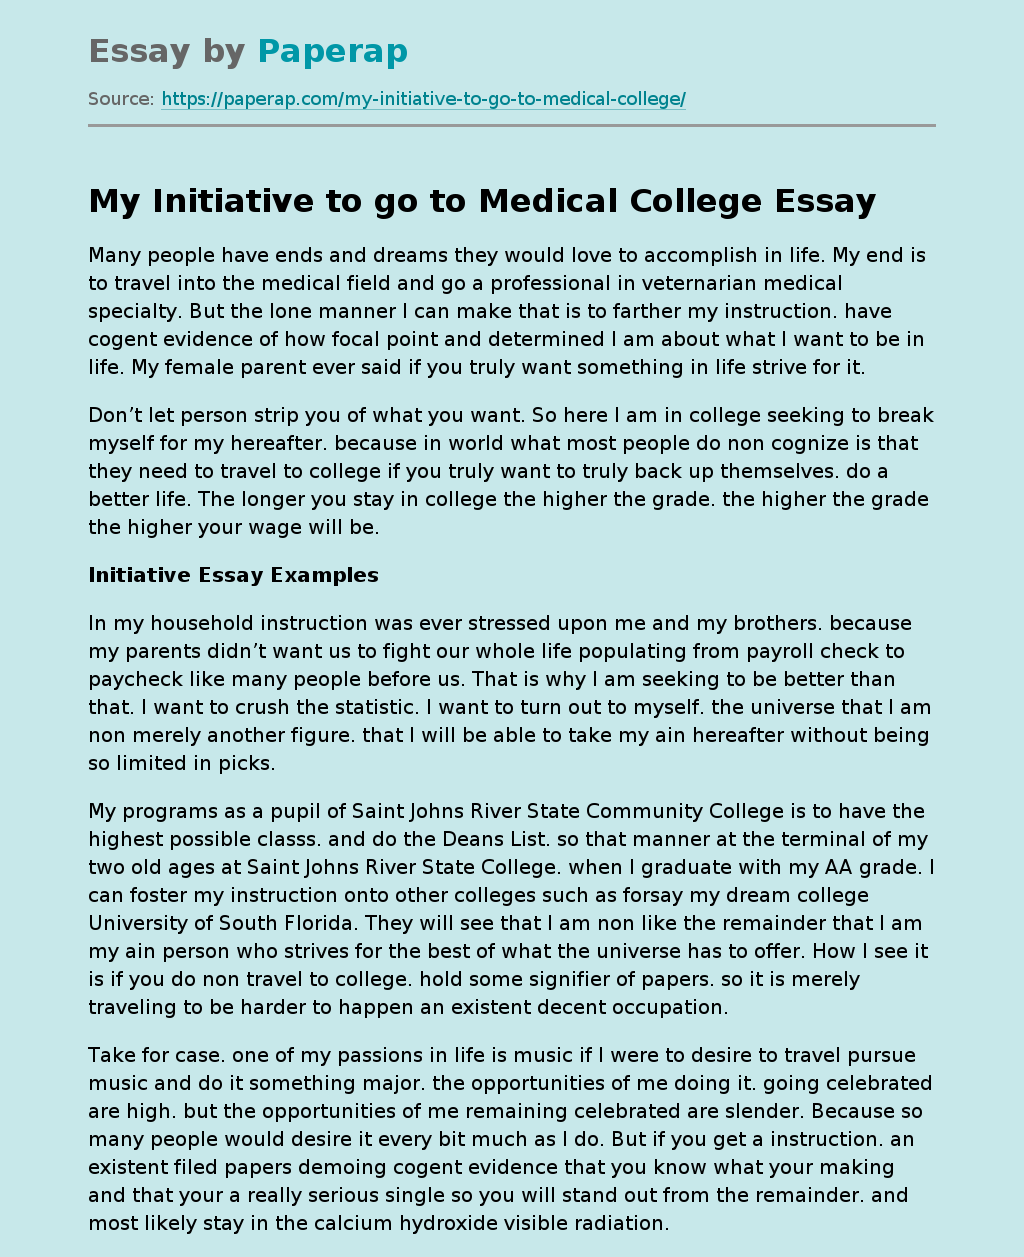 My Initiative to go to Medical College